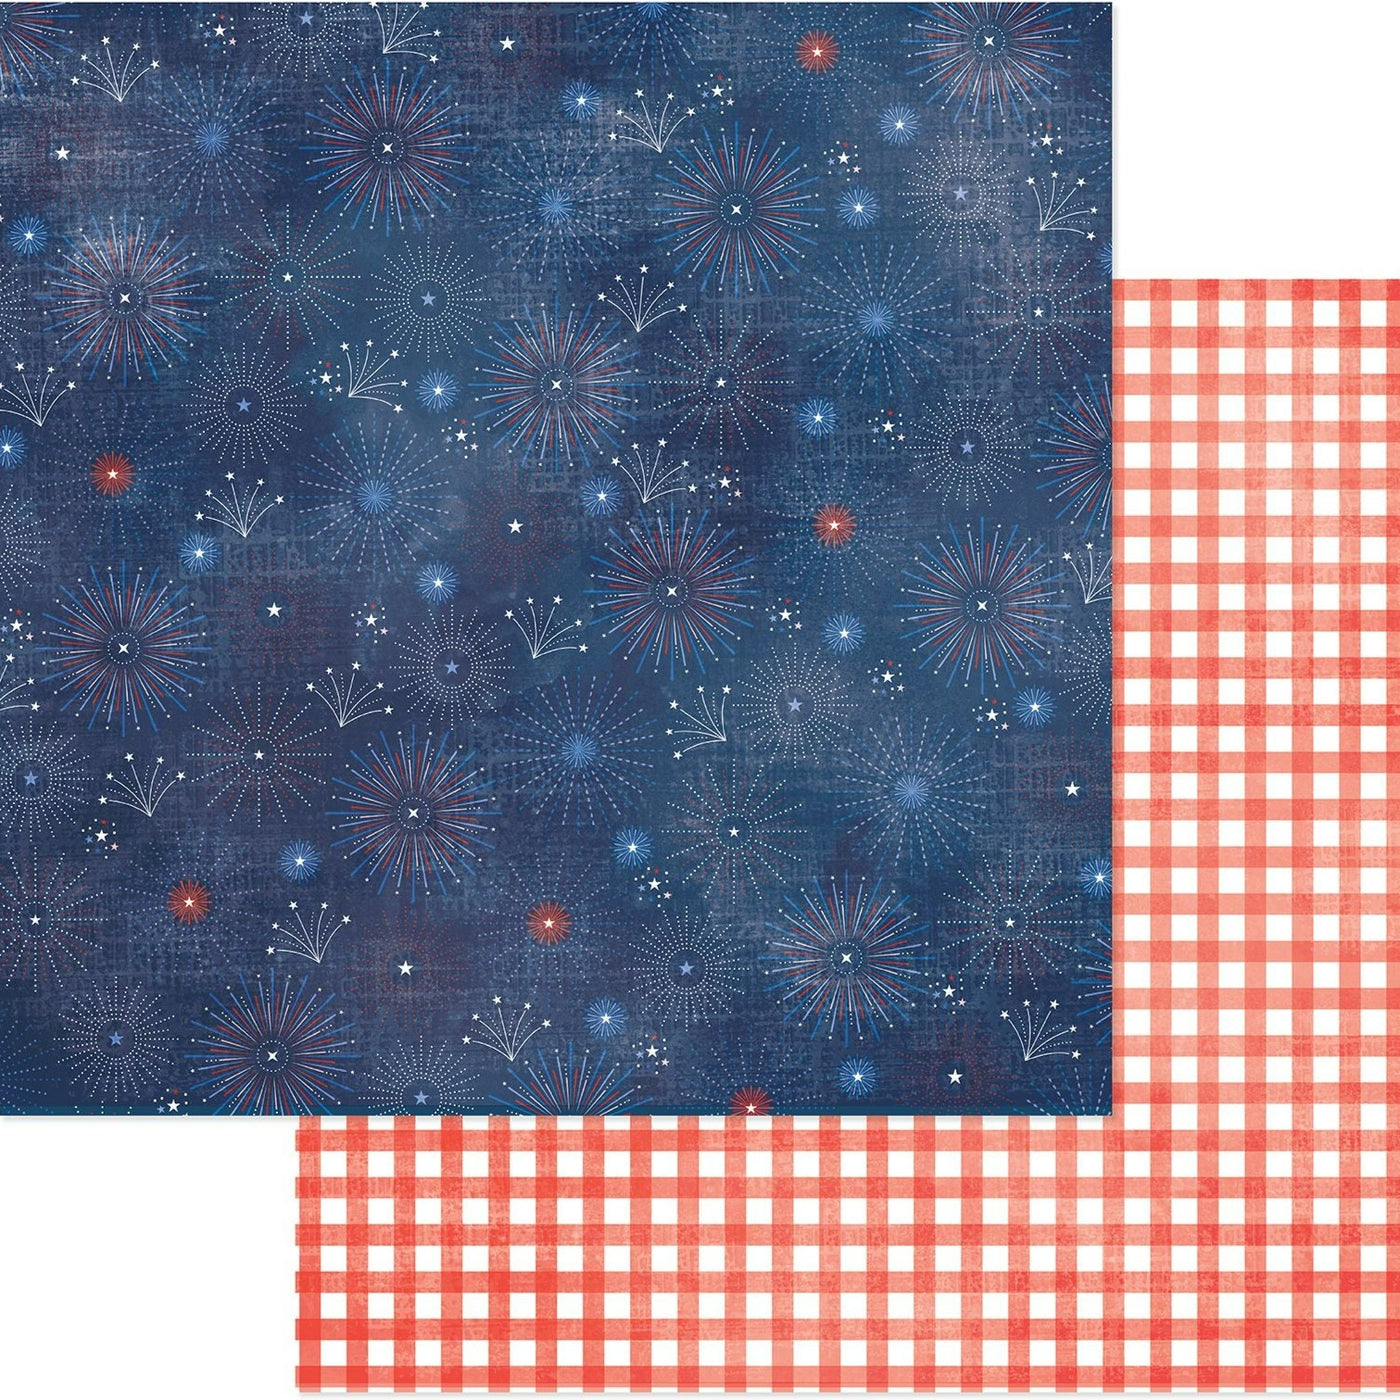 12x12 double-sided patterned paper. (Side A - fireworks on a navy blue background, Side B - red plaid on a white background) - American Crafts